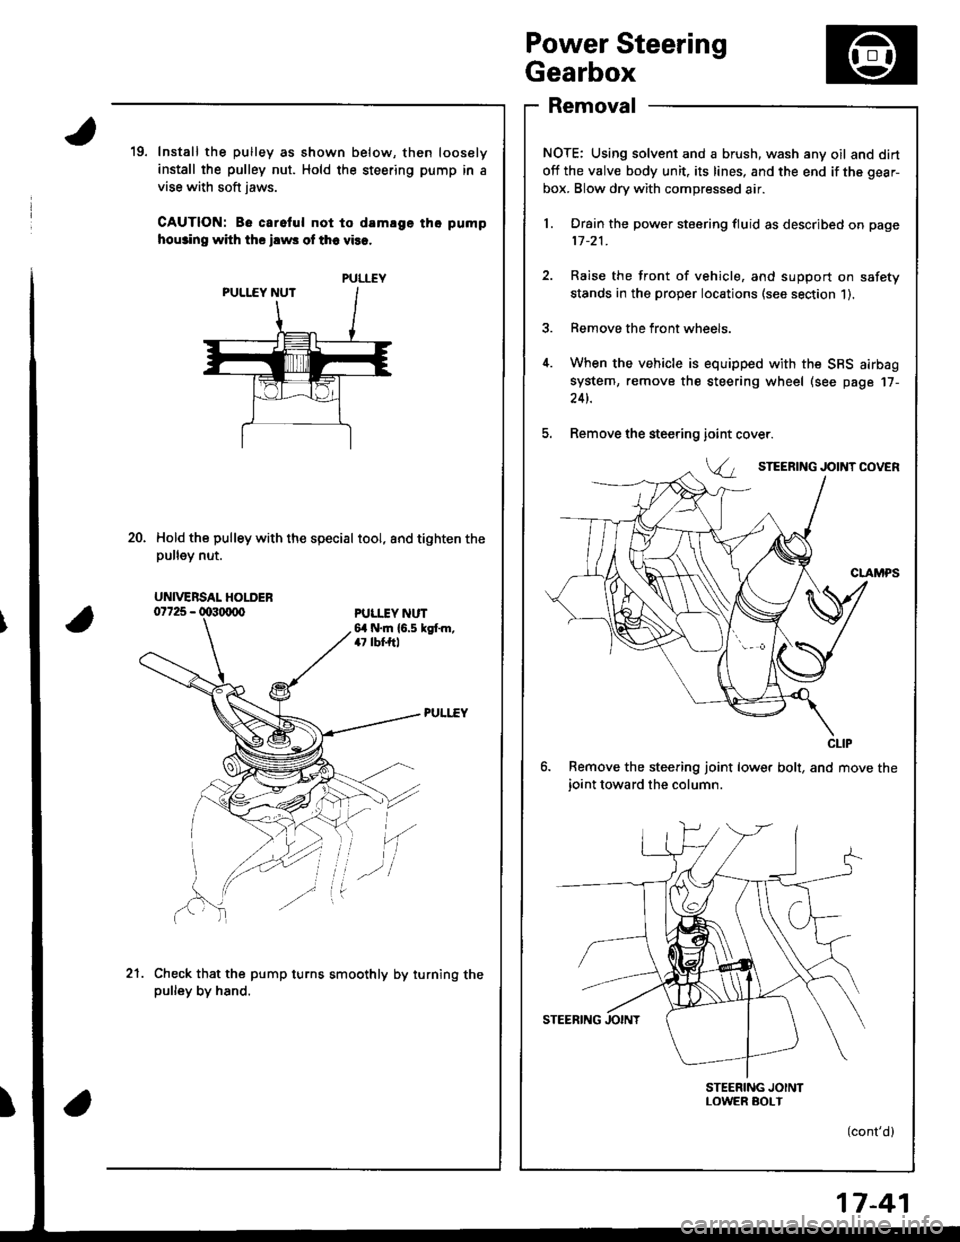 HONDA INTEGRA 1998 4.G Workshop Manual Power Steering
Gearbox
Removal
NOTE: Using solvent and a brush, wash any oil and dirt
off the valve body unit, its lines, and the end if the gear-
box. Blow dry with compressed air.
l. Drain the power